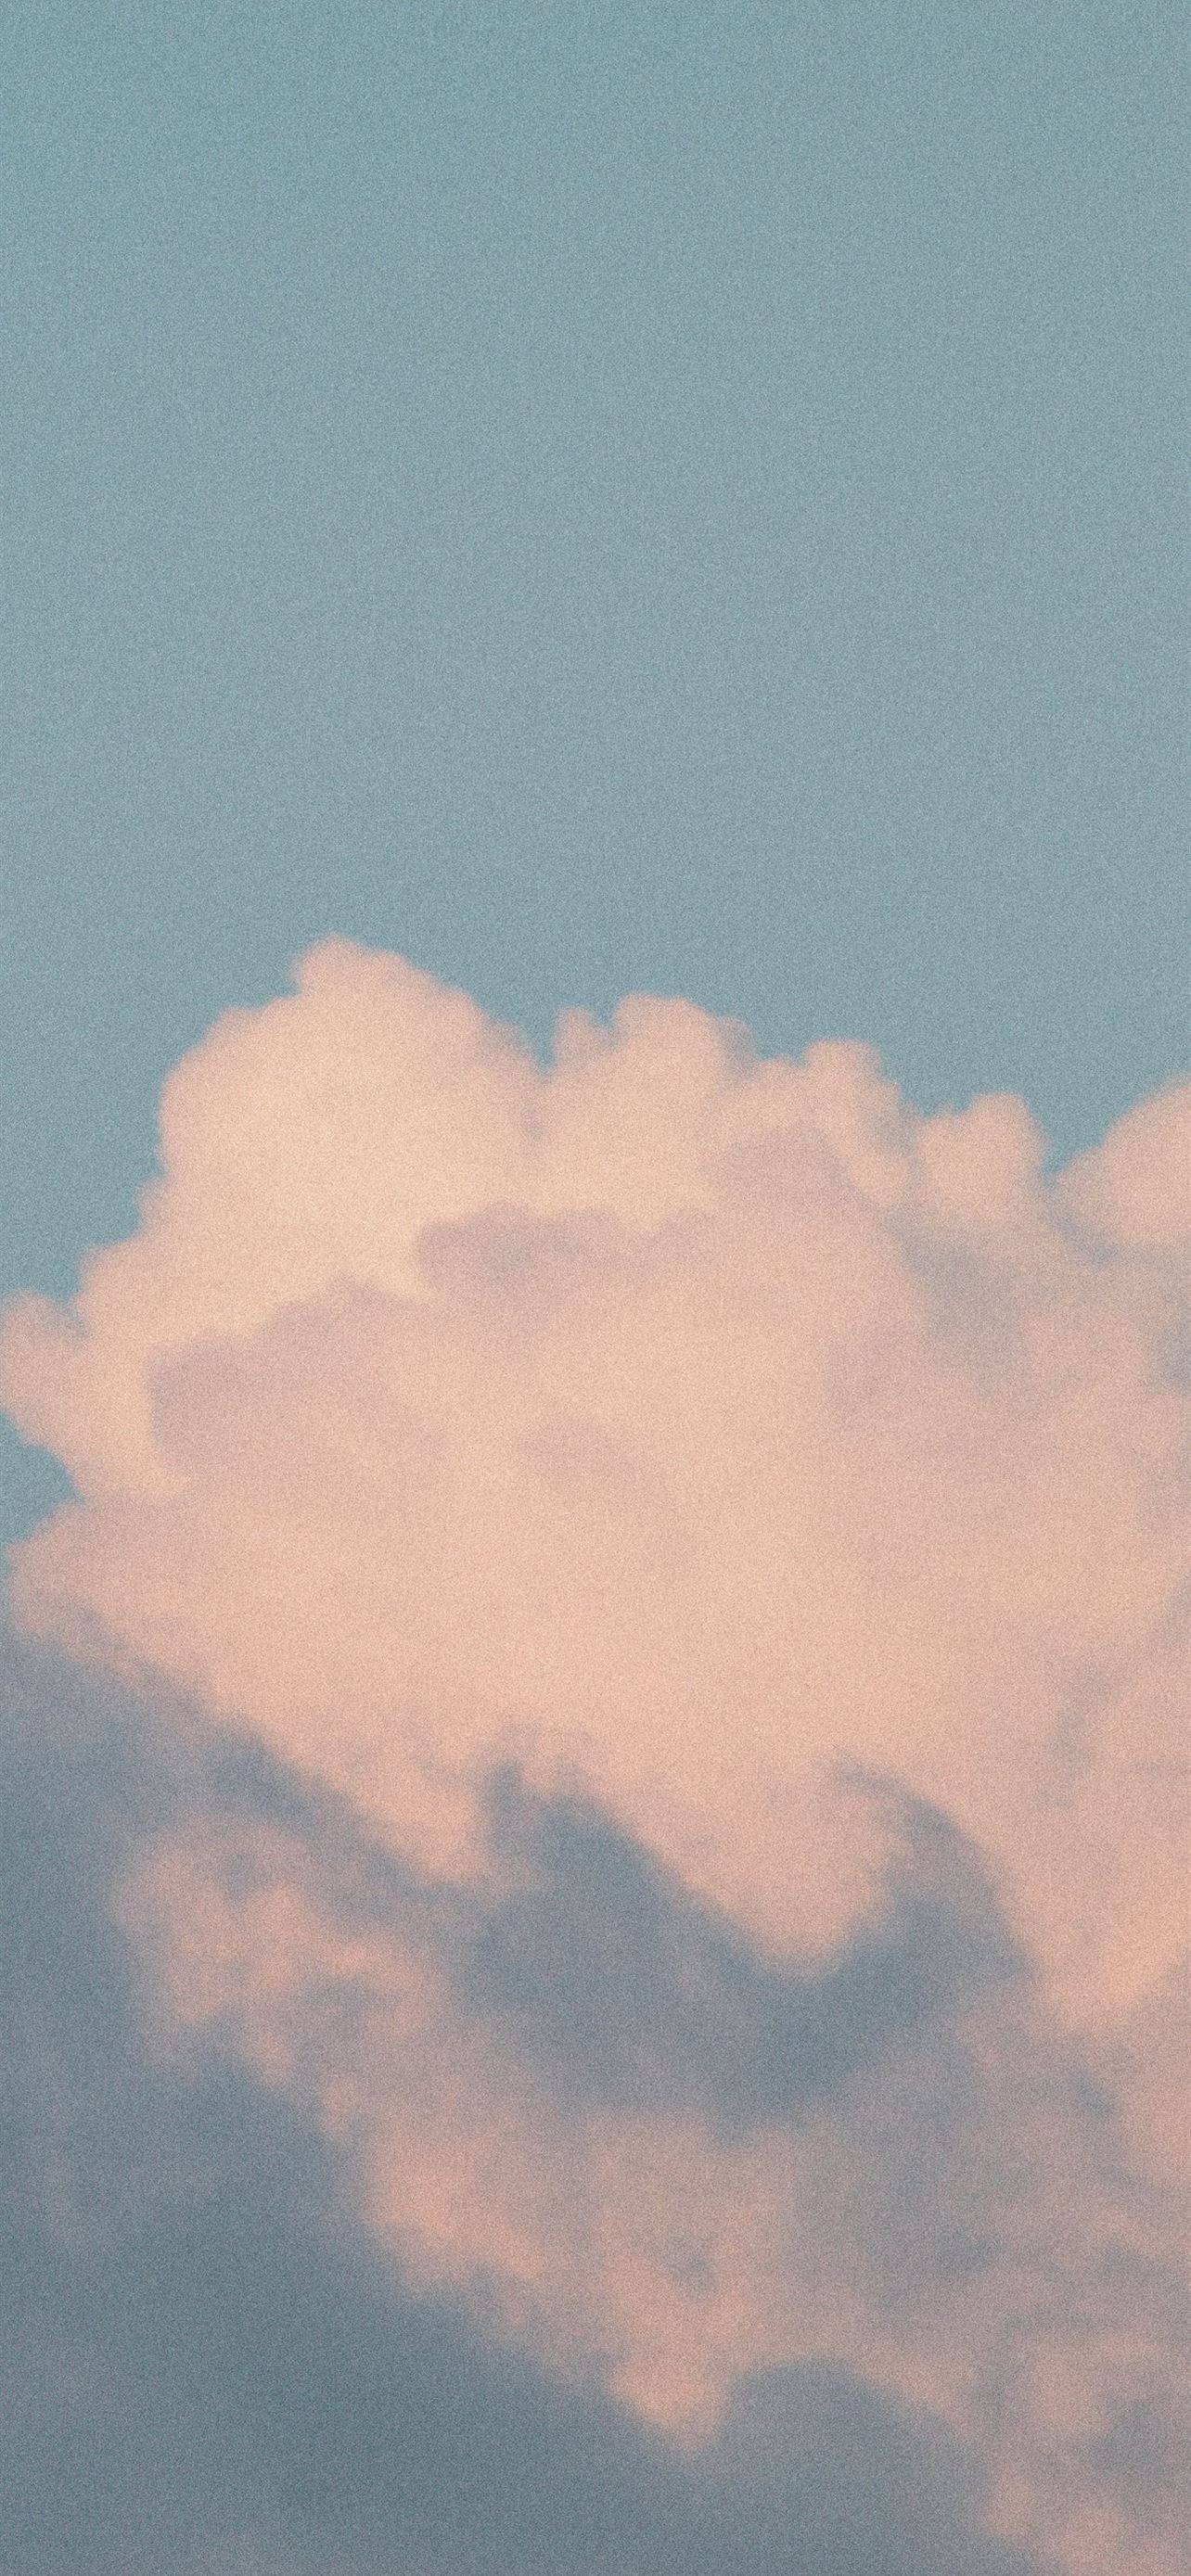 white clouds on blue sky iPhone Wallpaper Free Download